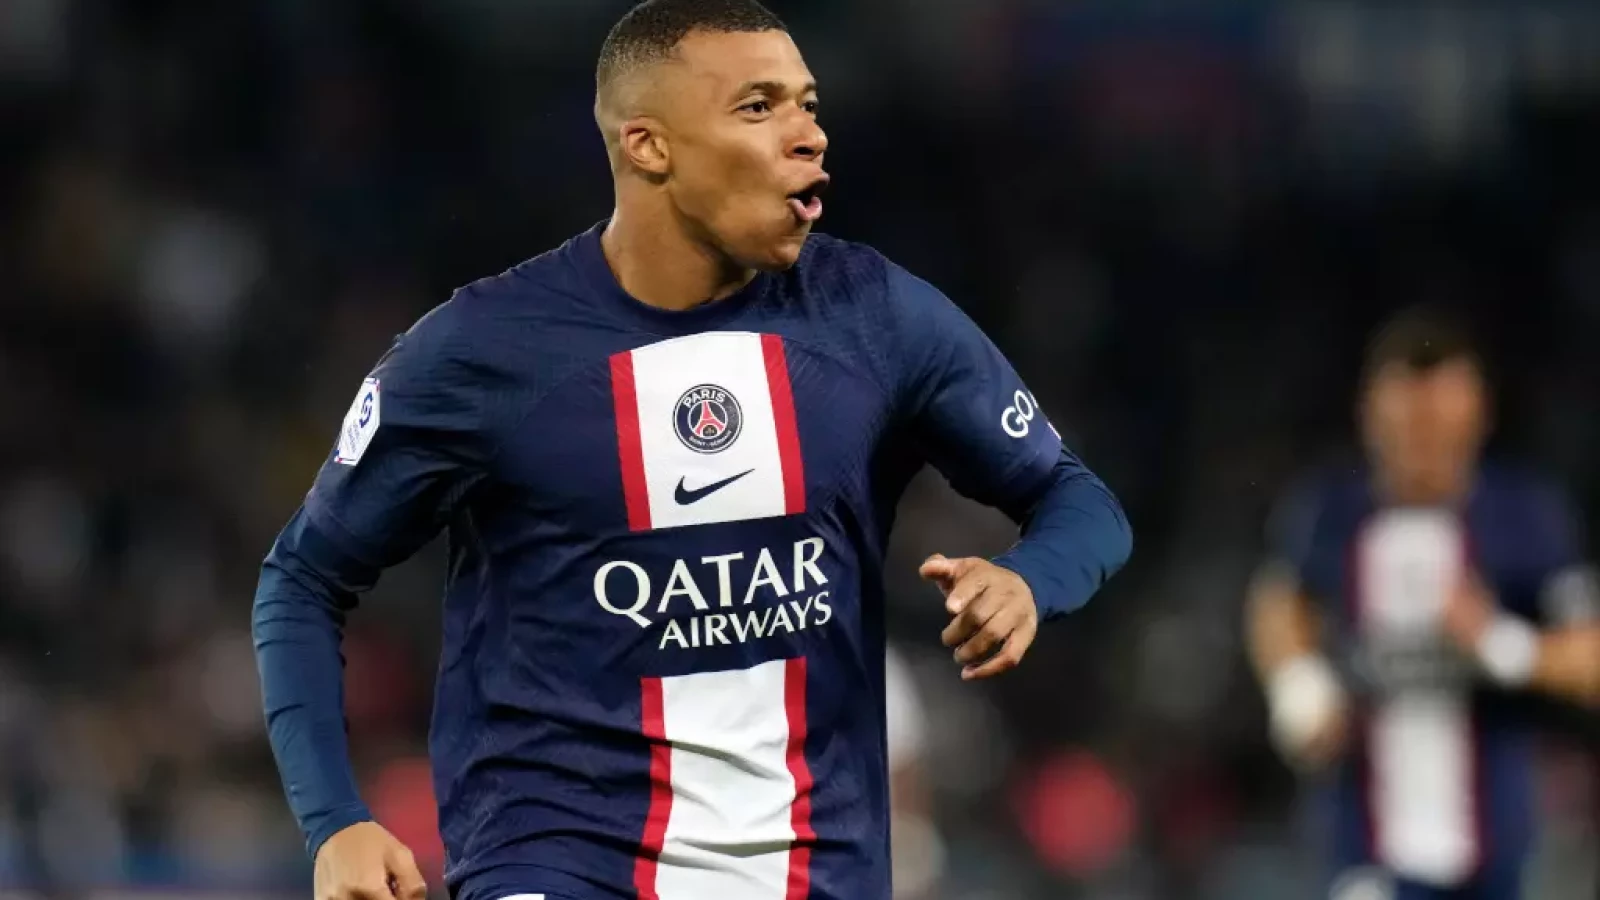 I never settle, I just want to win - PSG star Kylian Mbappe discusses  future after winning best French player award